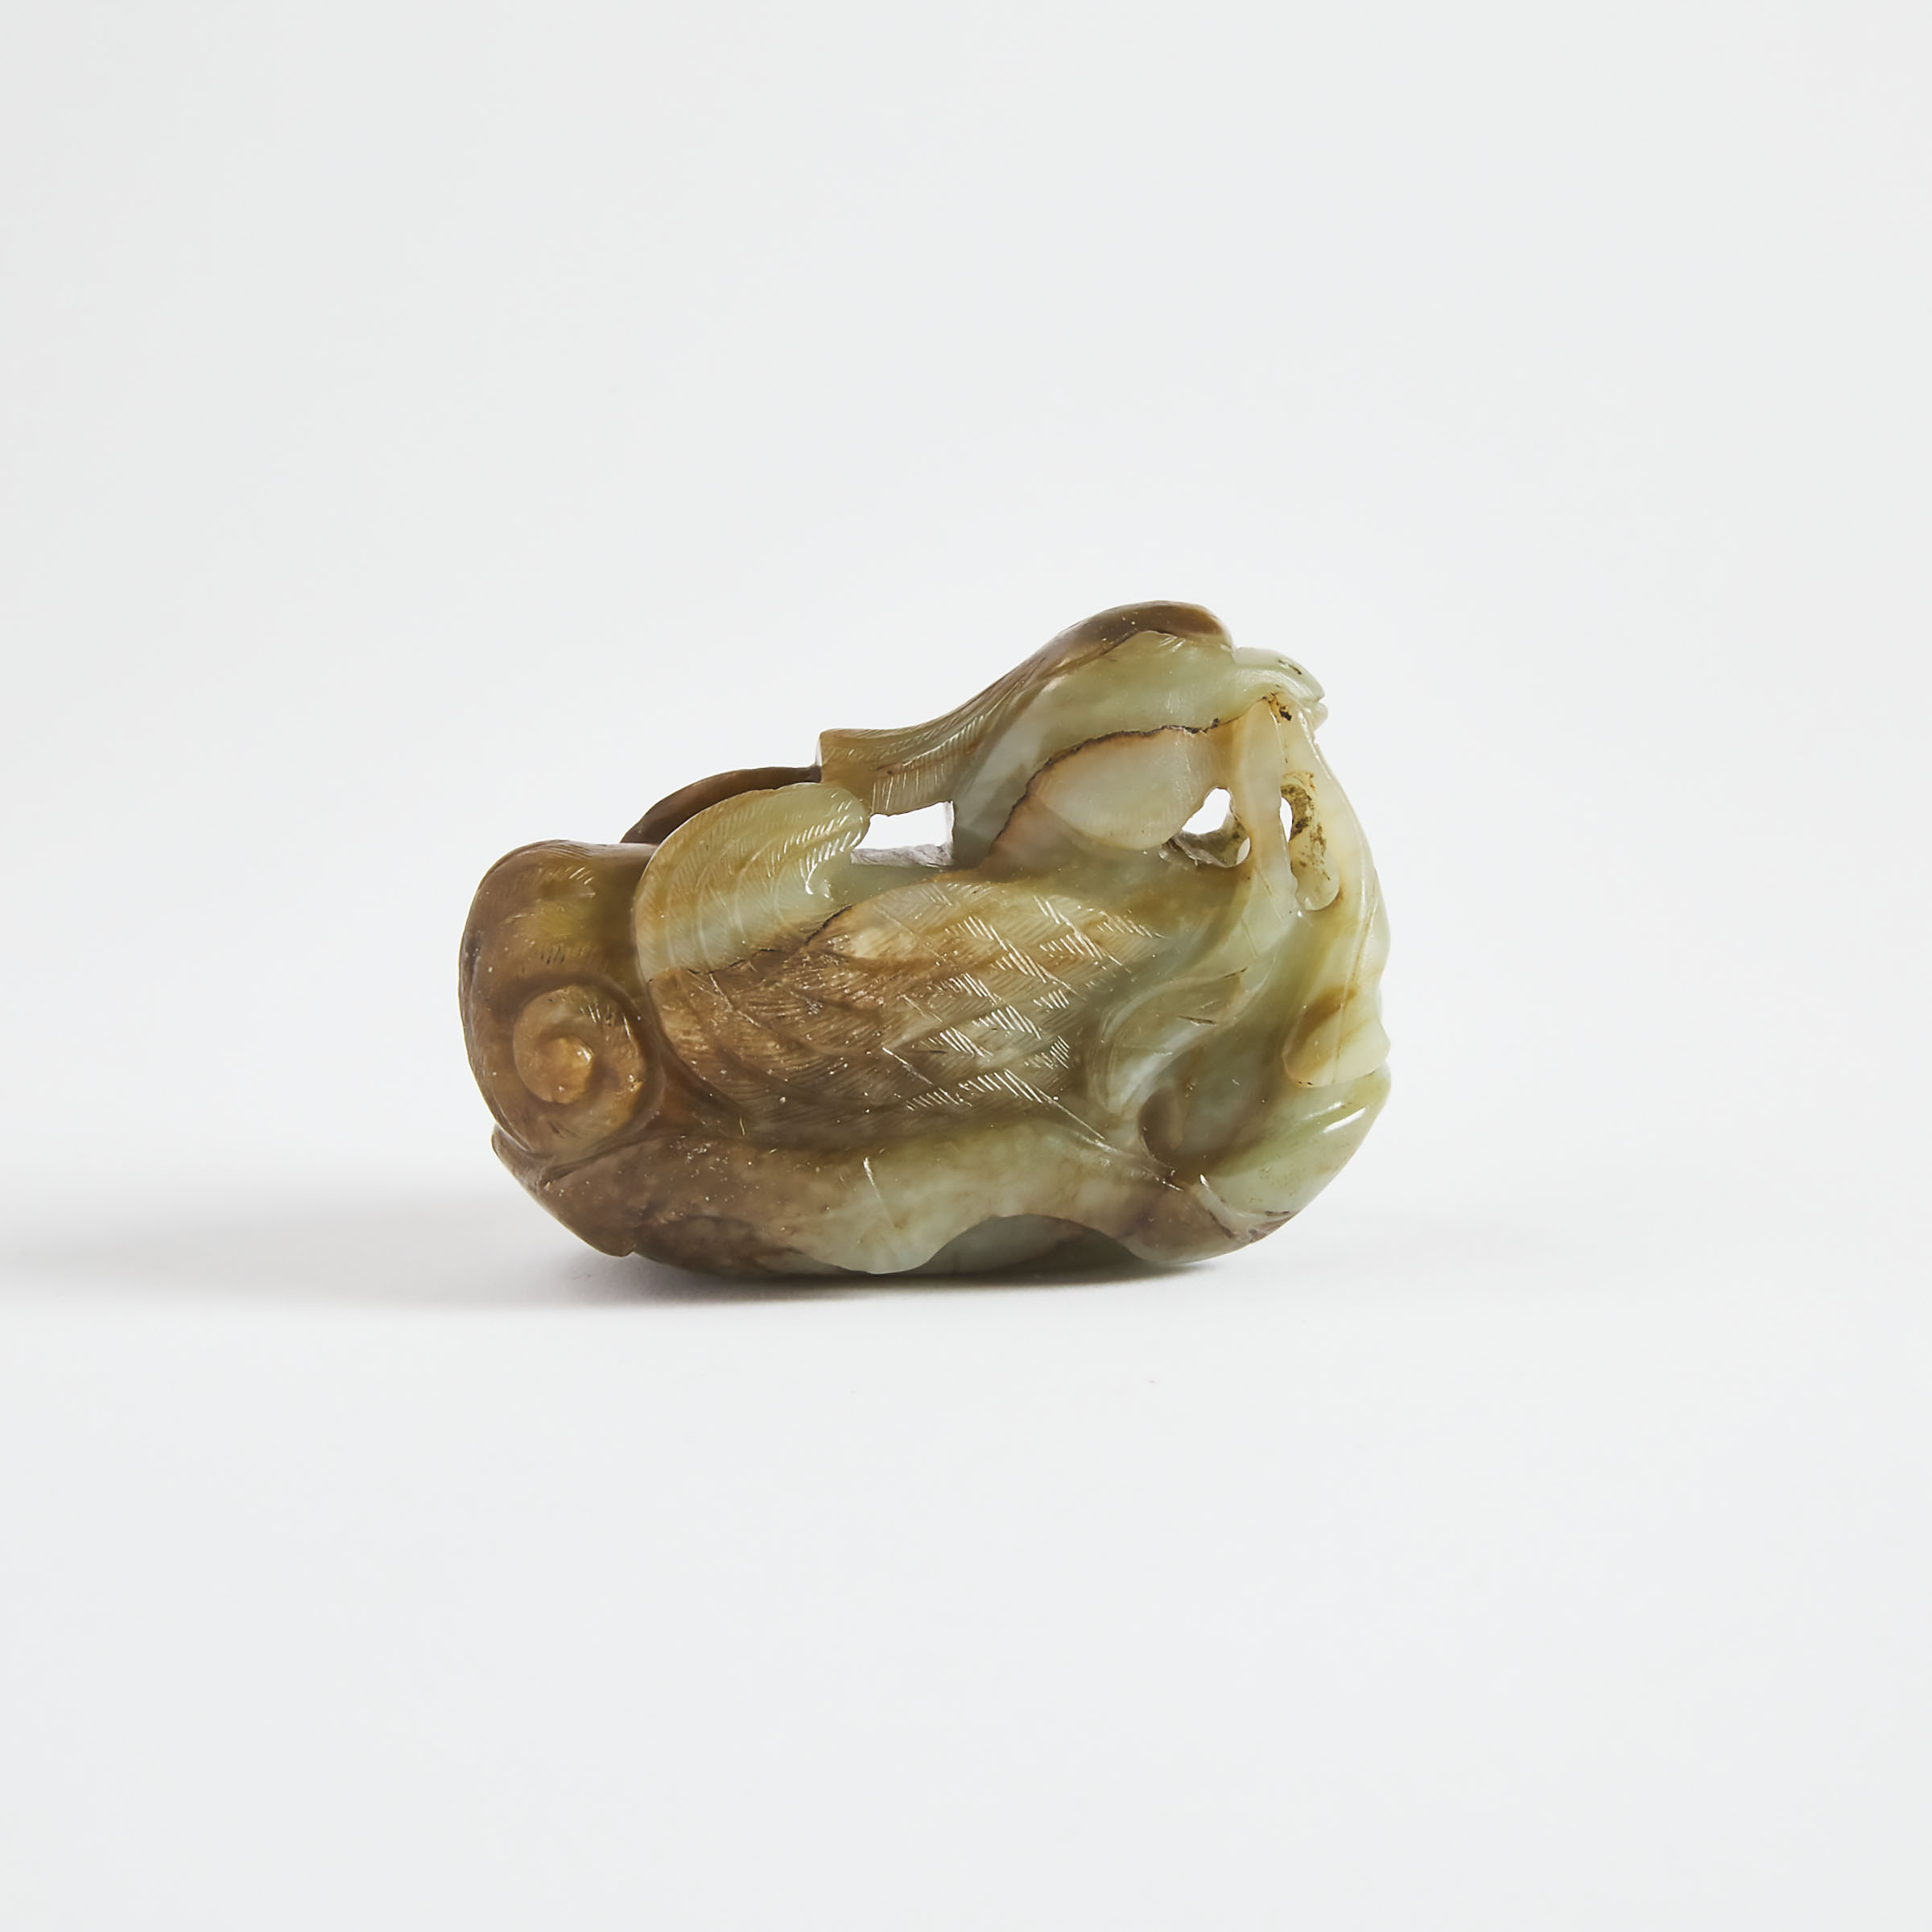 A Celadon and Russet Jade Mandarin Duck, Ming Dynasty, 16th/17th Century